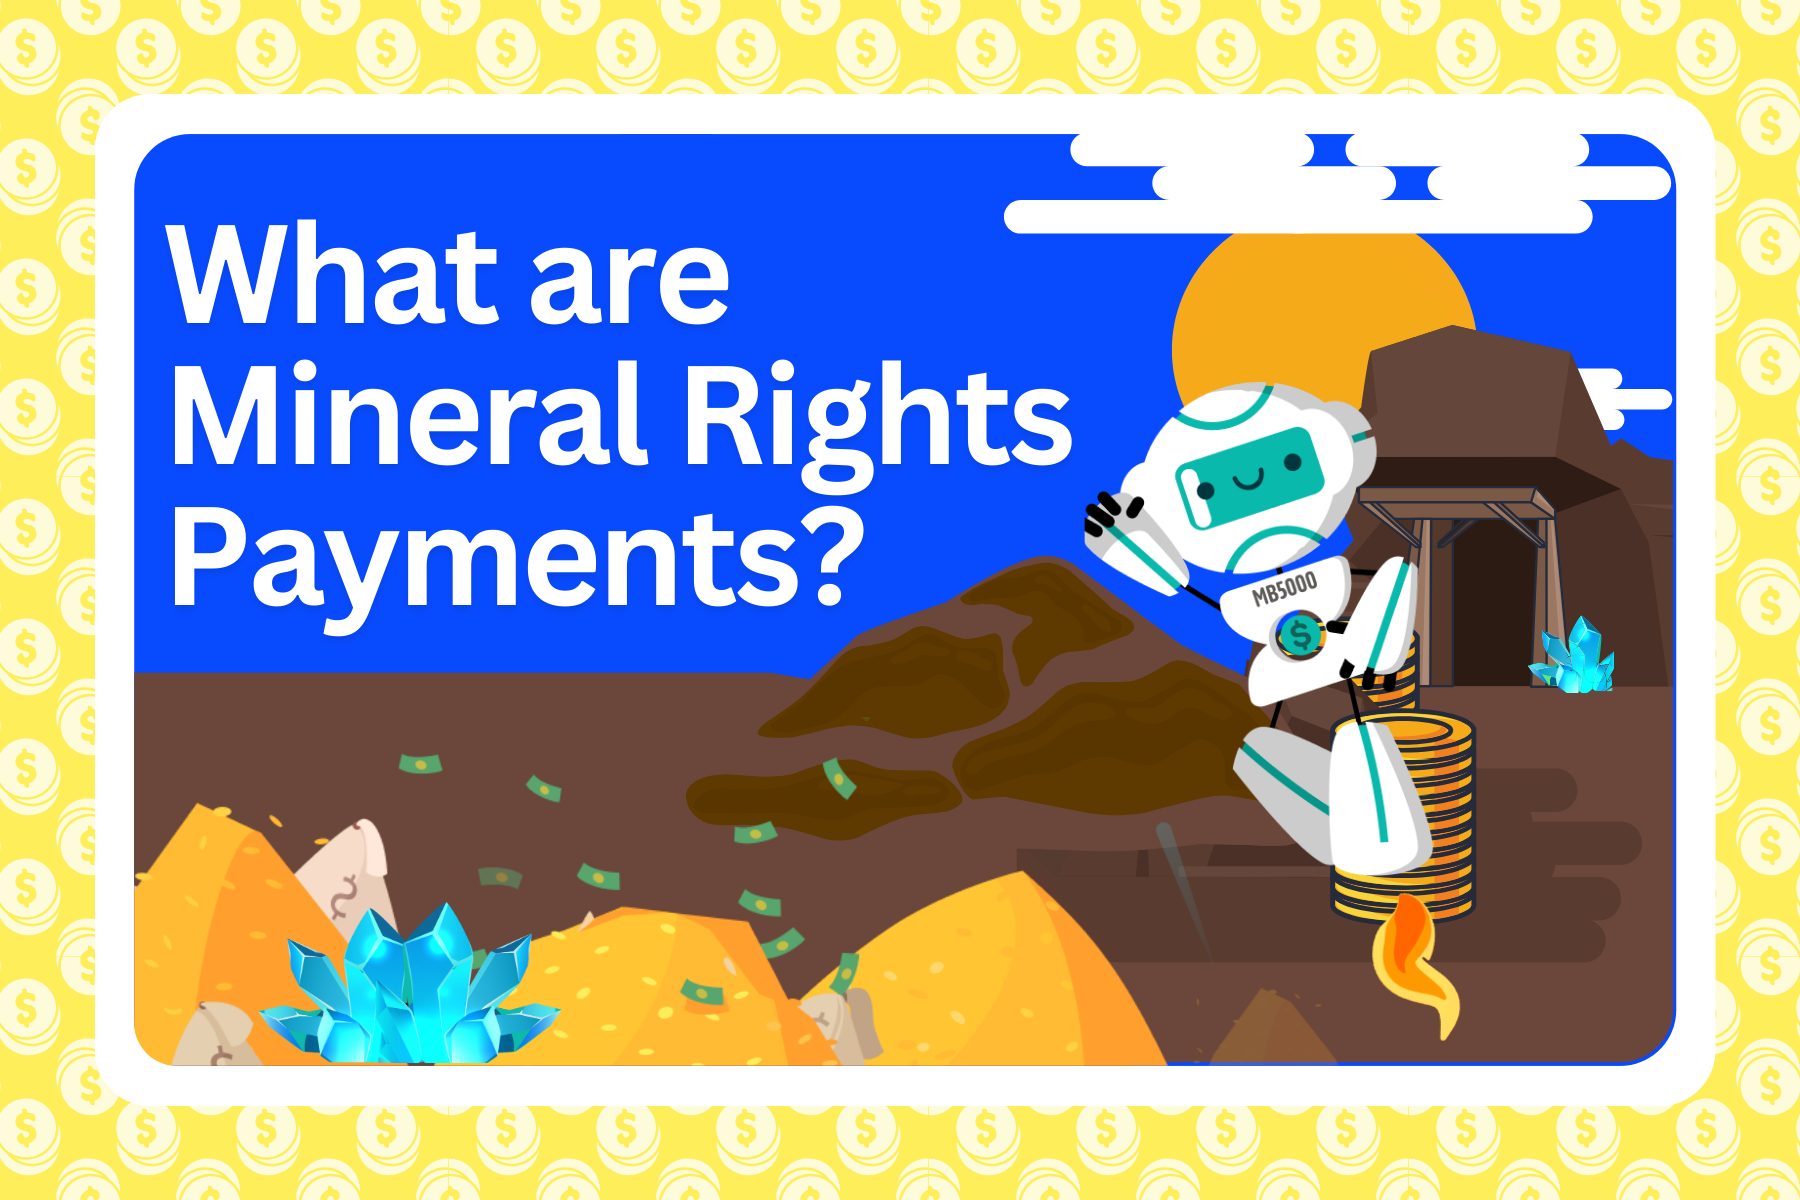 What are Mineral Rights Payments?